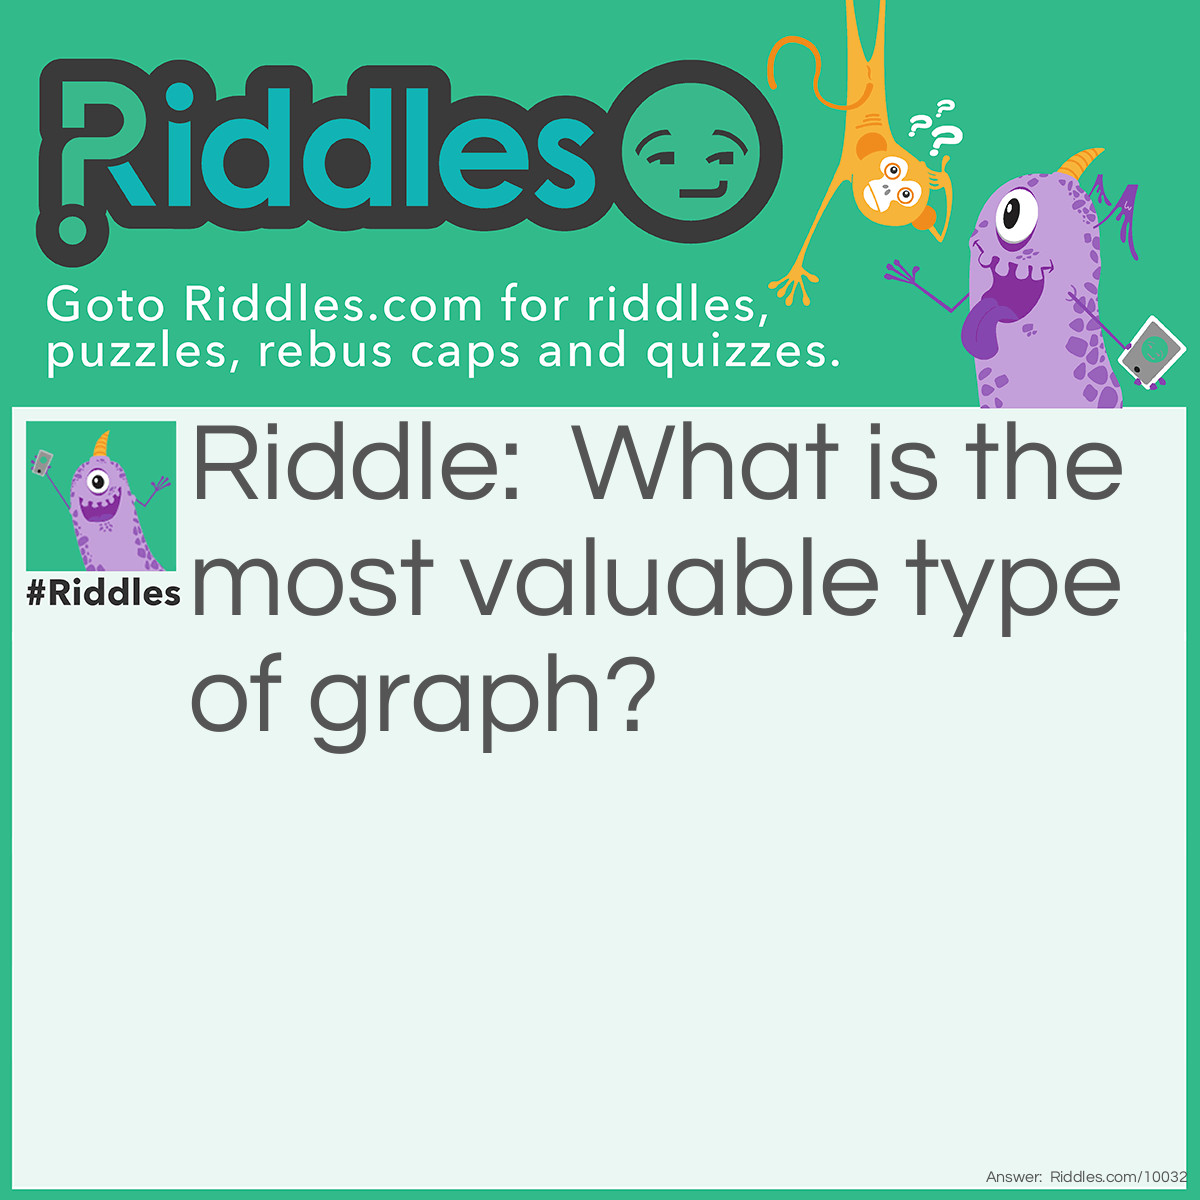 Riddle: What is the most valuable type of graph? Answer: An autograph.